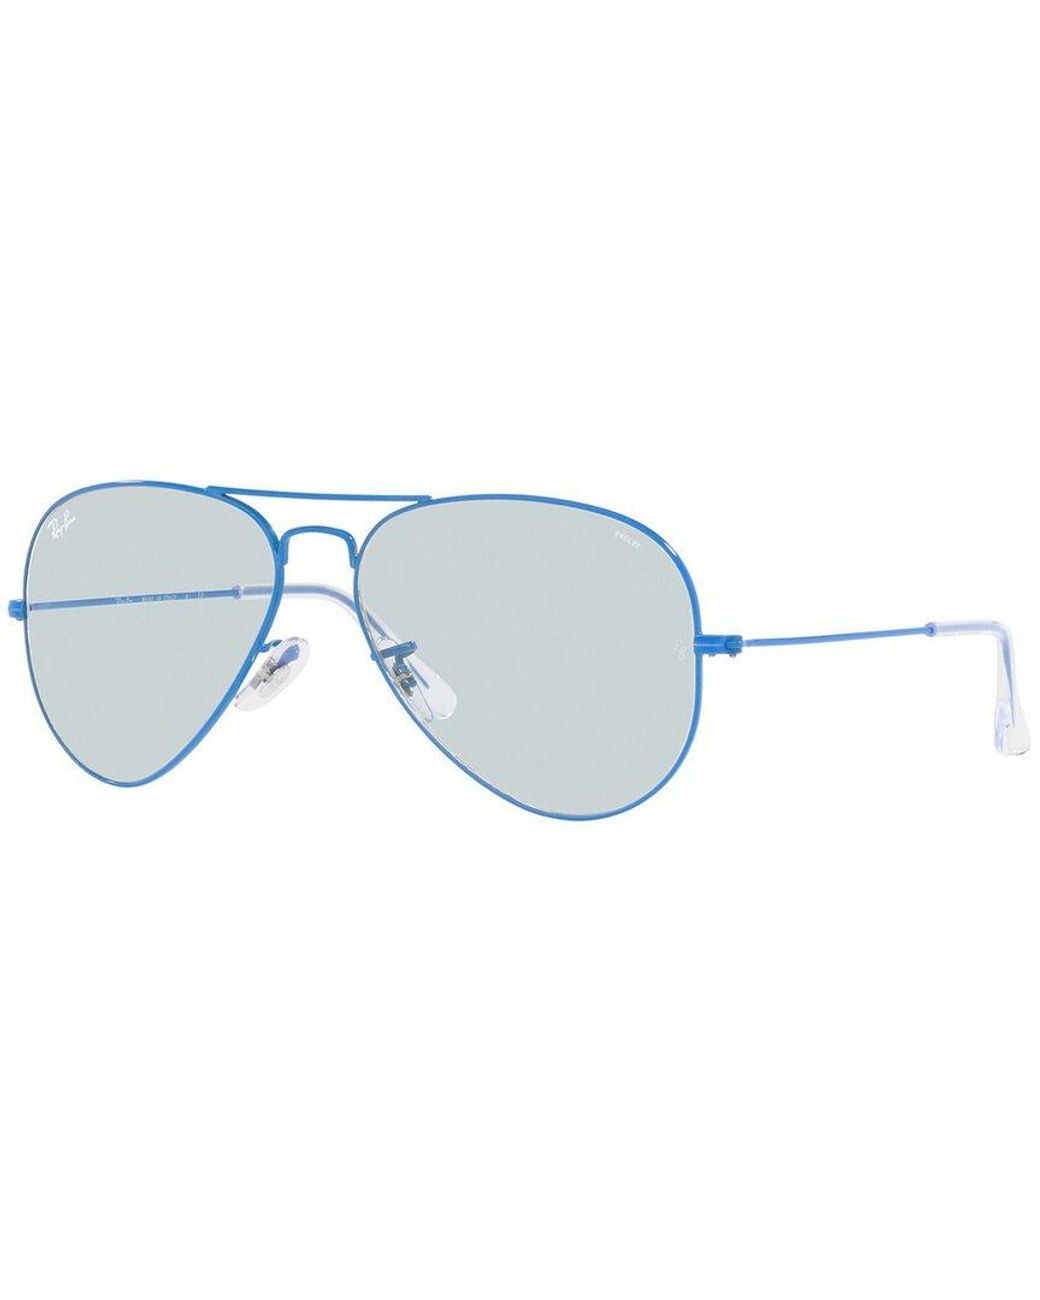 Ray-Ban Unisex Rb3025 55mm Sunglasses in Blue | Lyst